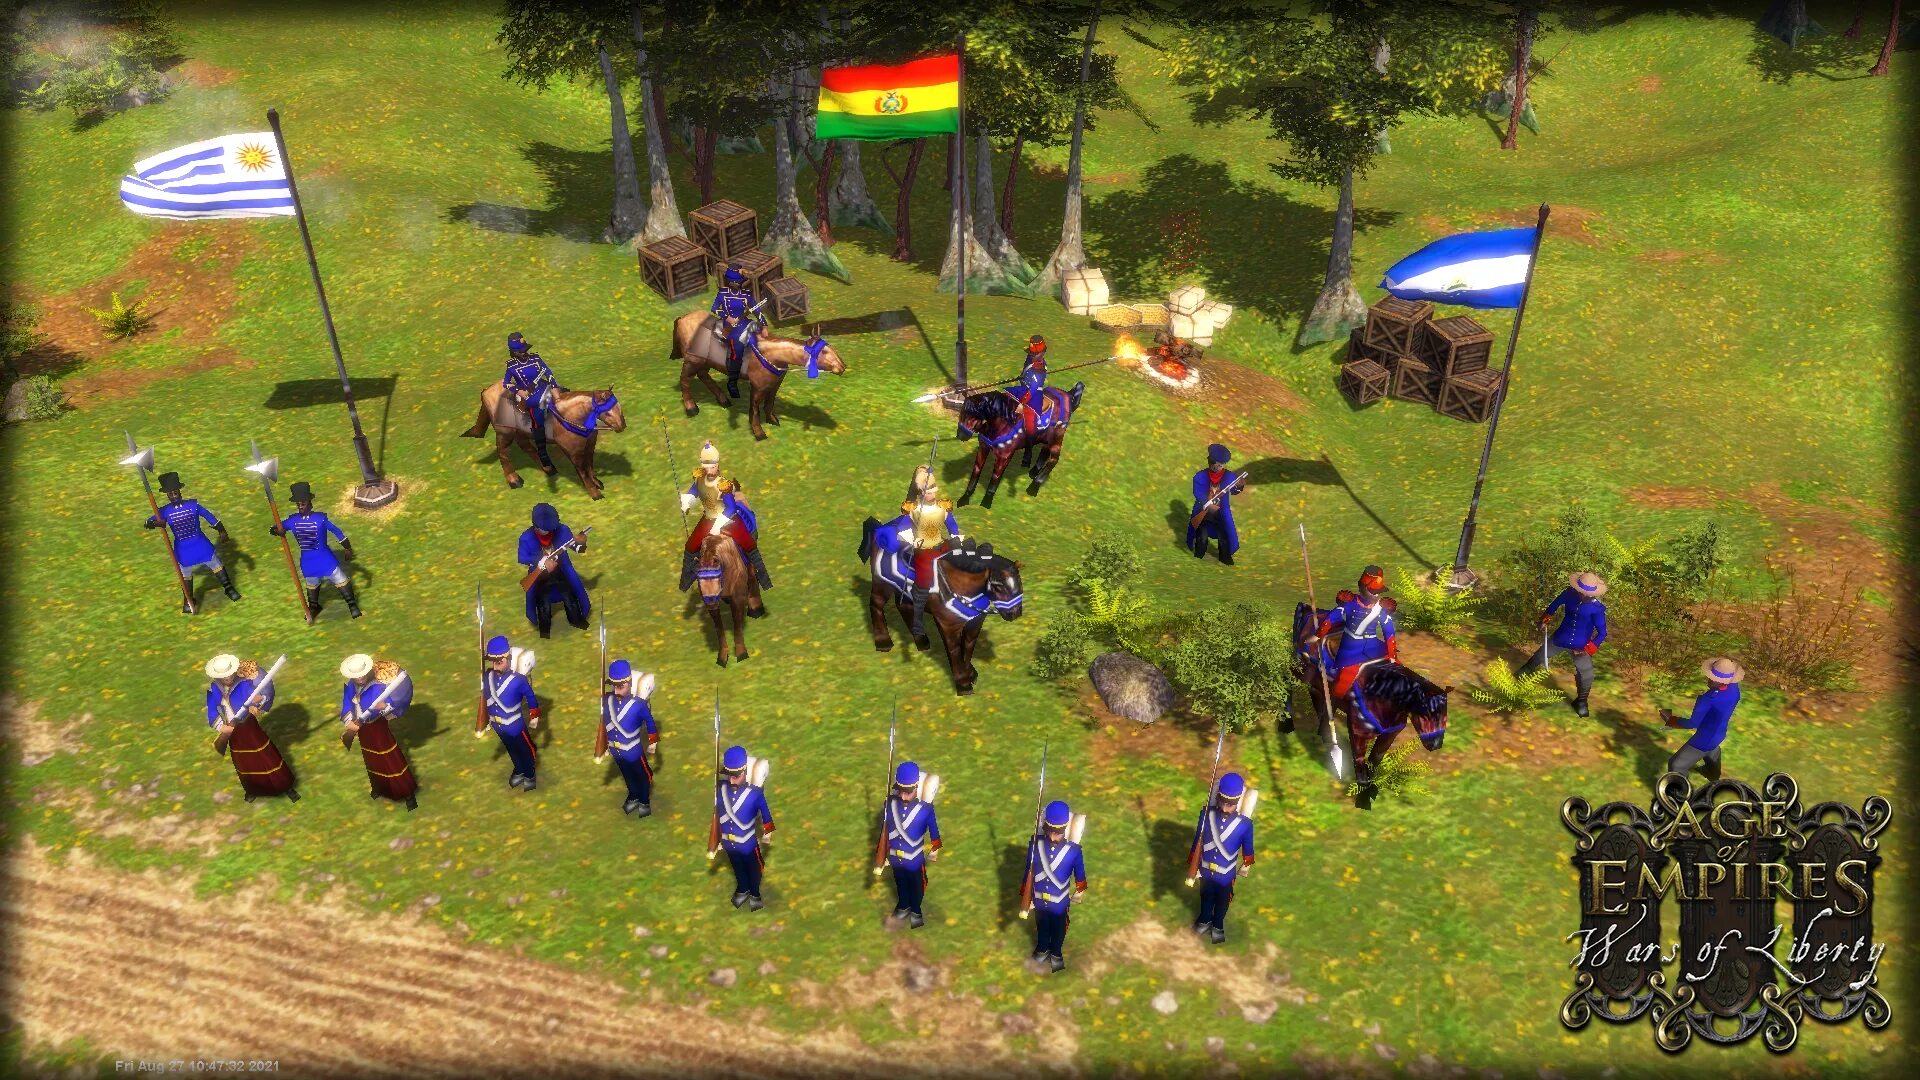 Age of 3 моды. AOE 3 Wars of Liberty. Age of Empires 3 Wars of Liberty. Age of Empires 3 моды. Янычар age of Empires 3.